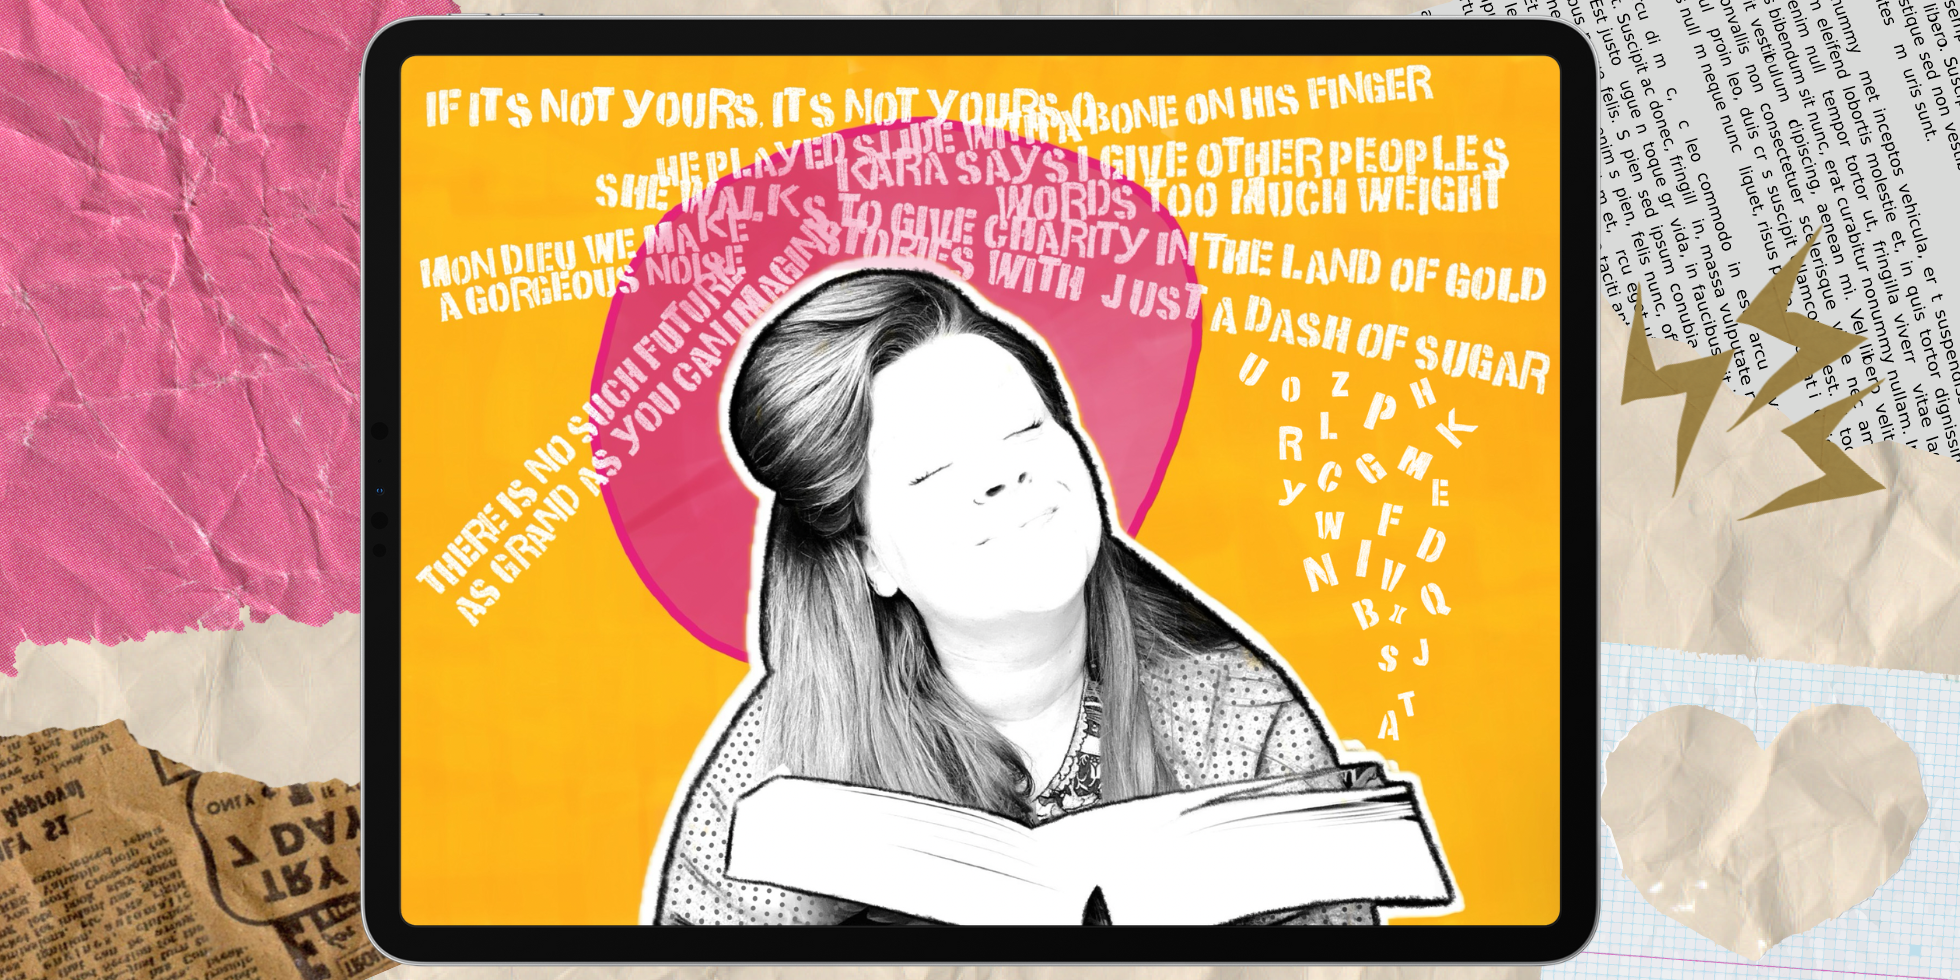 A pop art image with vibrant orange and pink hues of a girl holding a book with lots of quotations around her.